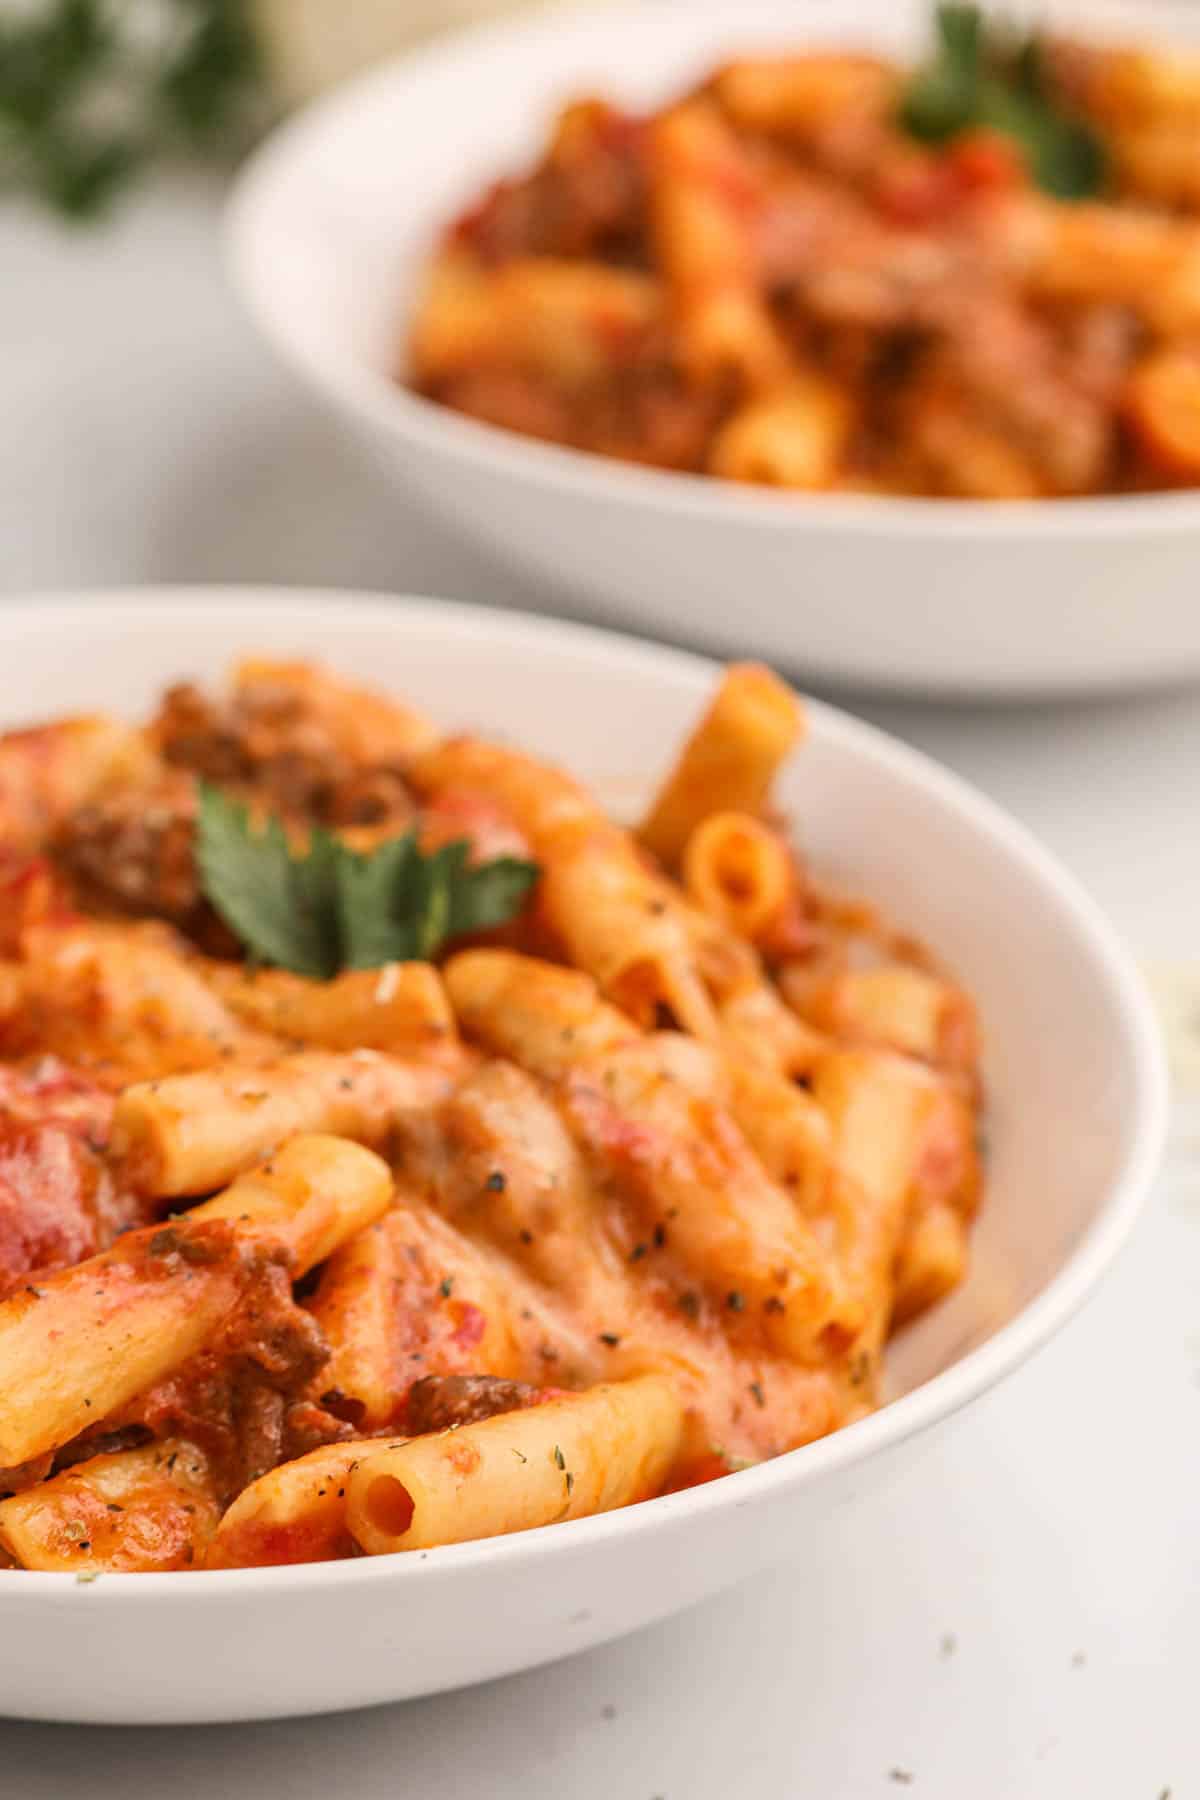 A close image of cheesy baked ziti in a white pasta bowl.